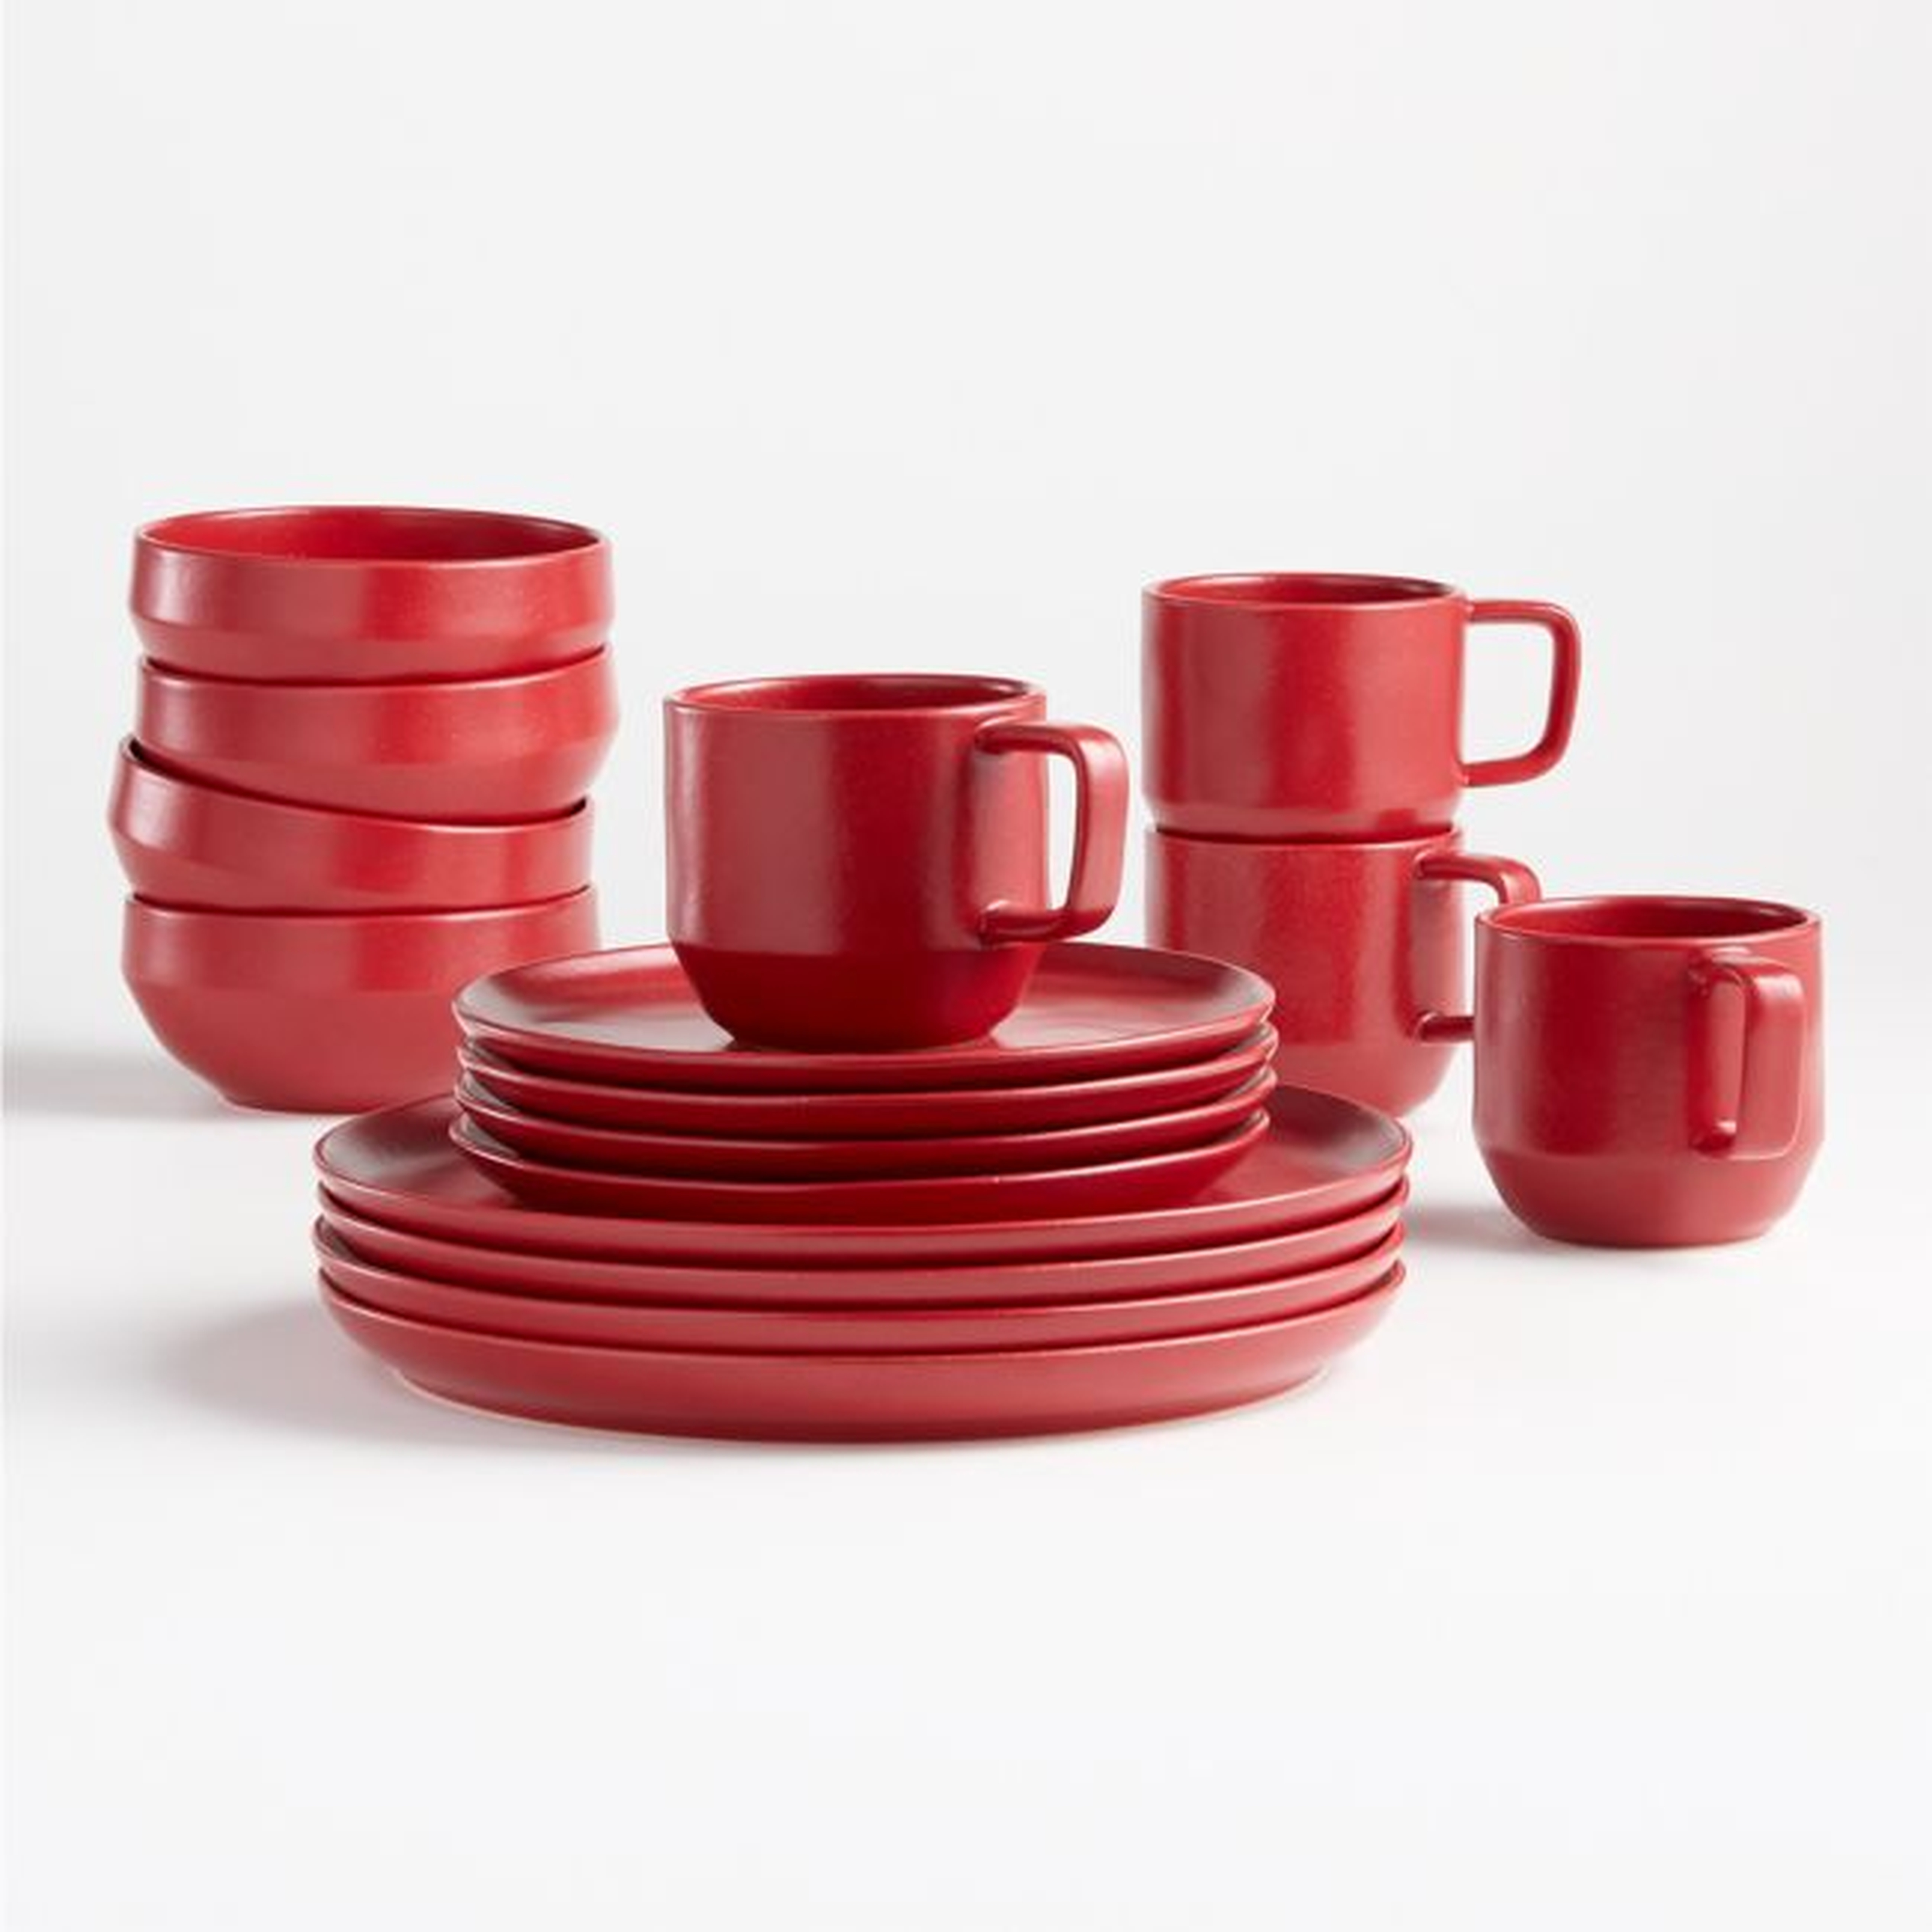 Visto 4-Piece Red Stoneware Place Setting - Crate and Barrel